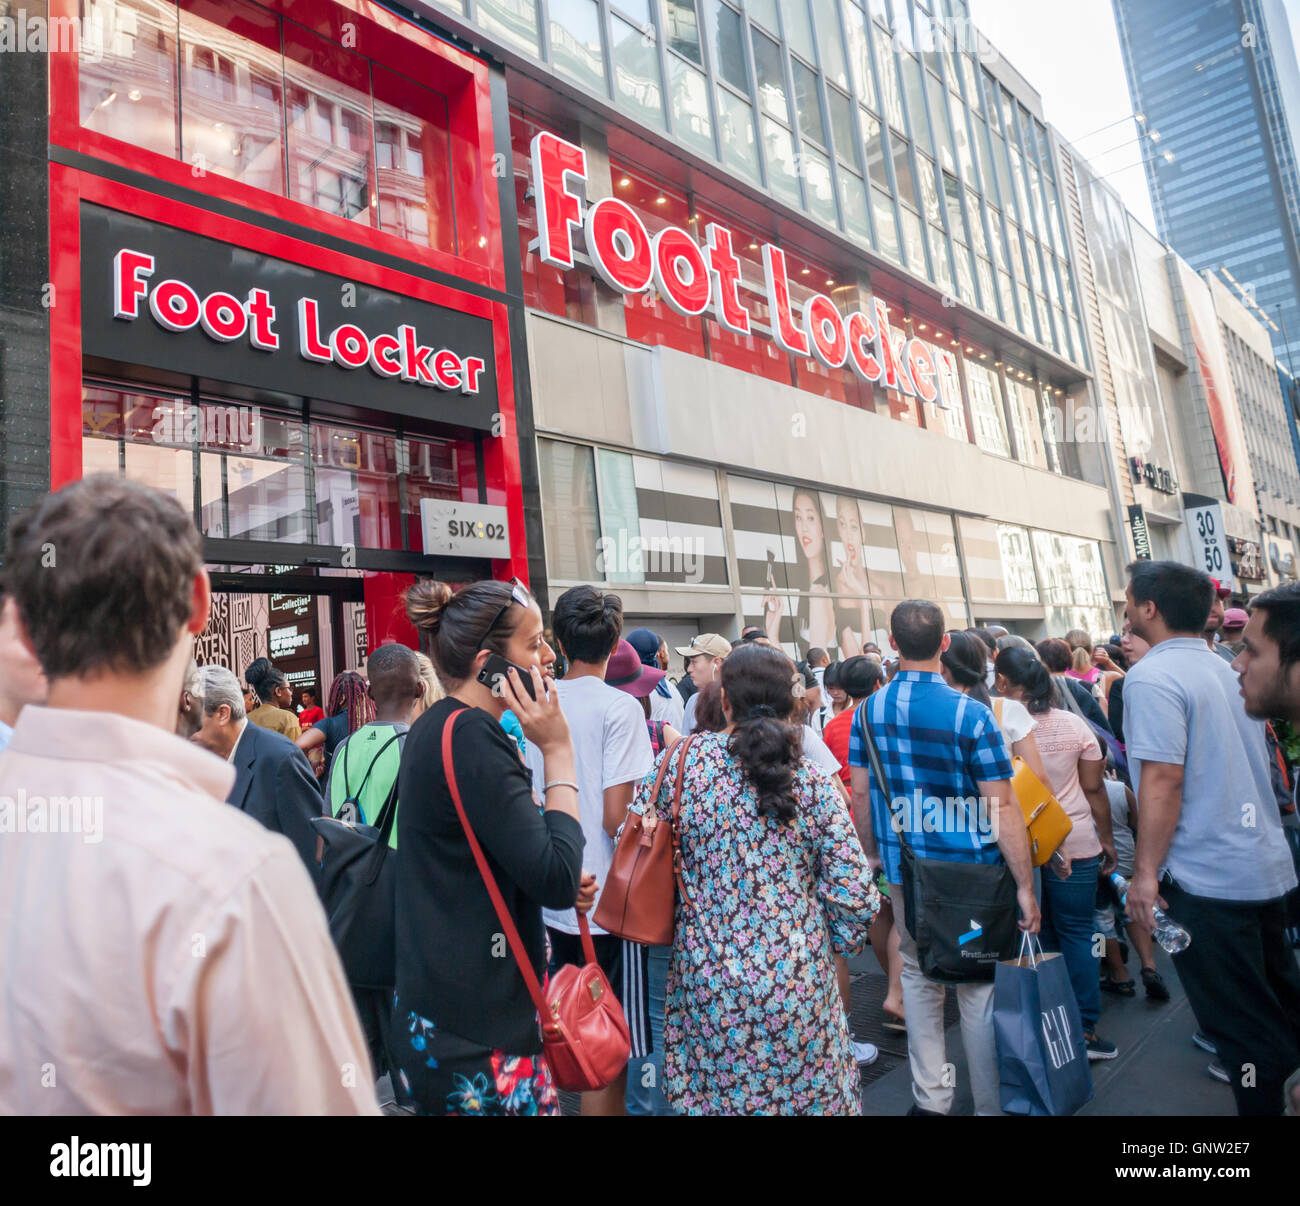 Hordes of shoppers outside the new experiential Foot Locker store in Herald Square in New York on opening day, Tuesday, August 30, 2016. The 10,000 square foot store is organized by brand as opposed to product category with separate areas for their Six:02, House of Hoops, and other brands. The store is on the second floor with a new Sephora to open at street level (hence the poster of the three models).  (© Richard B. Levine) Stock Photo